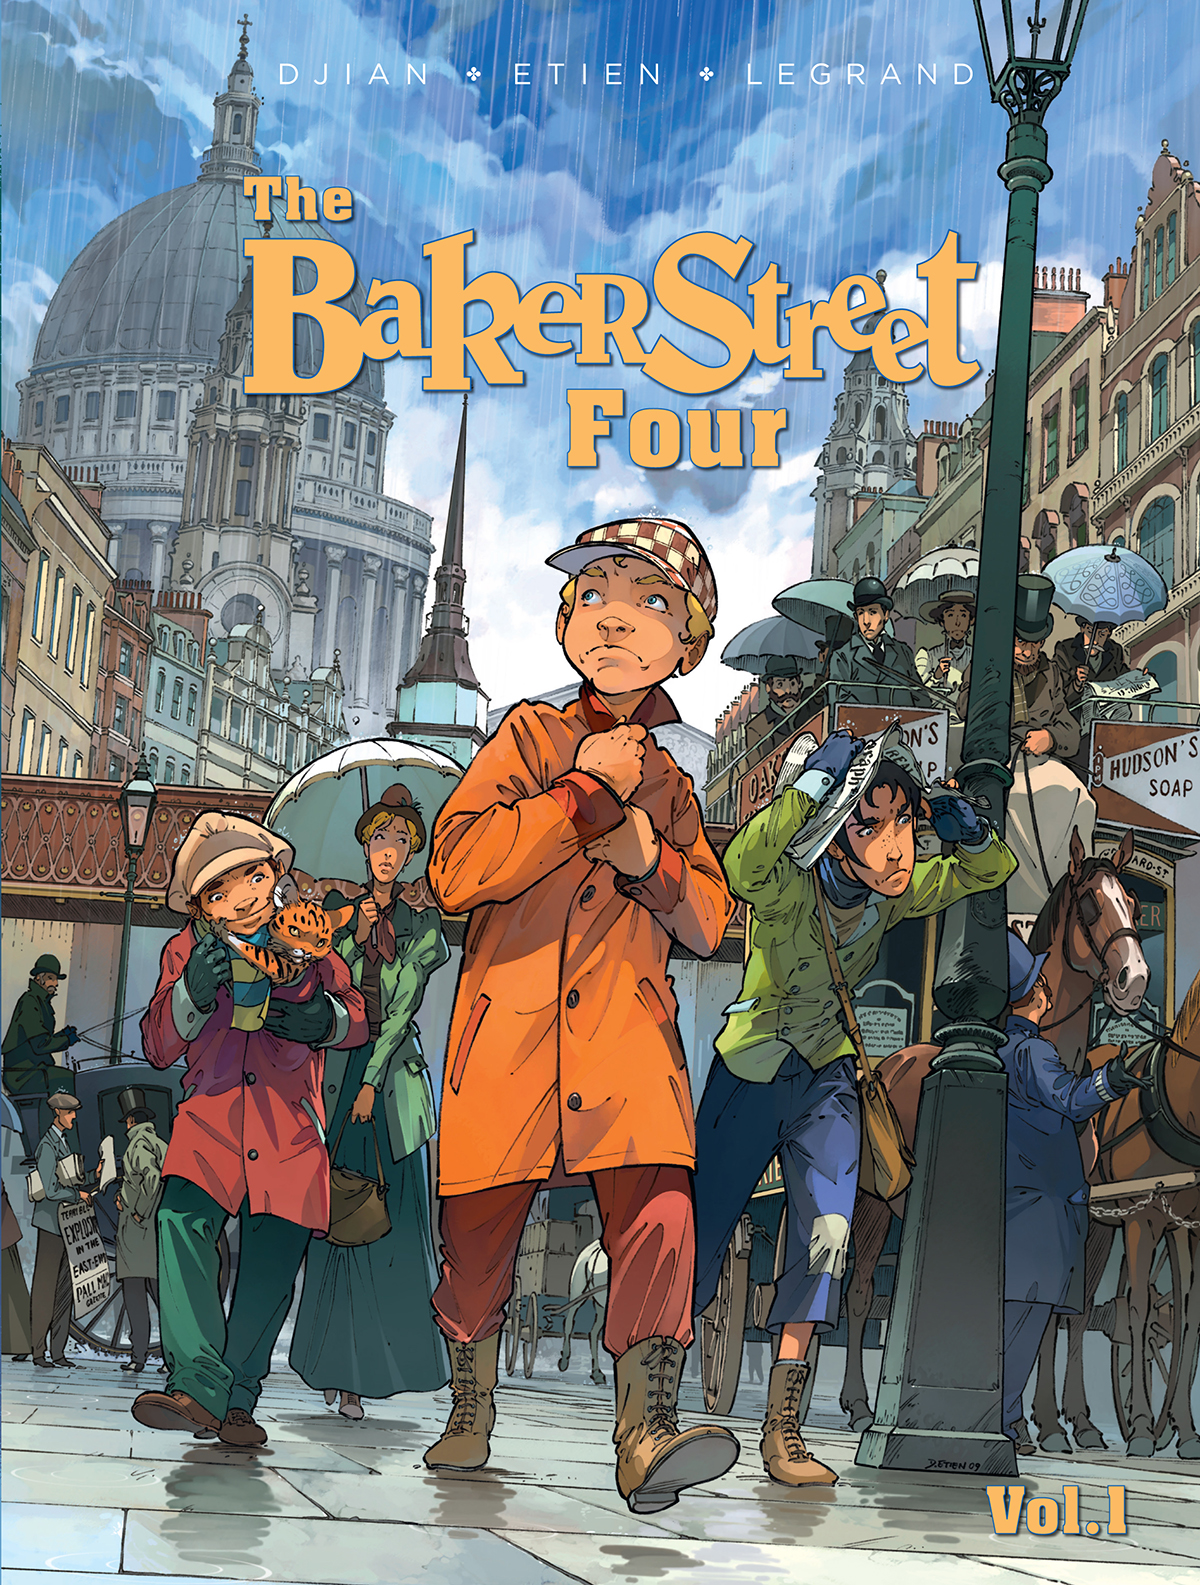 Read the First Chapter of The Baker Street Four by Olivier Legrand, J.B. Dijan & David ...